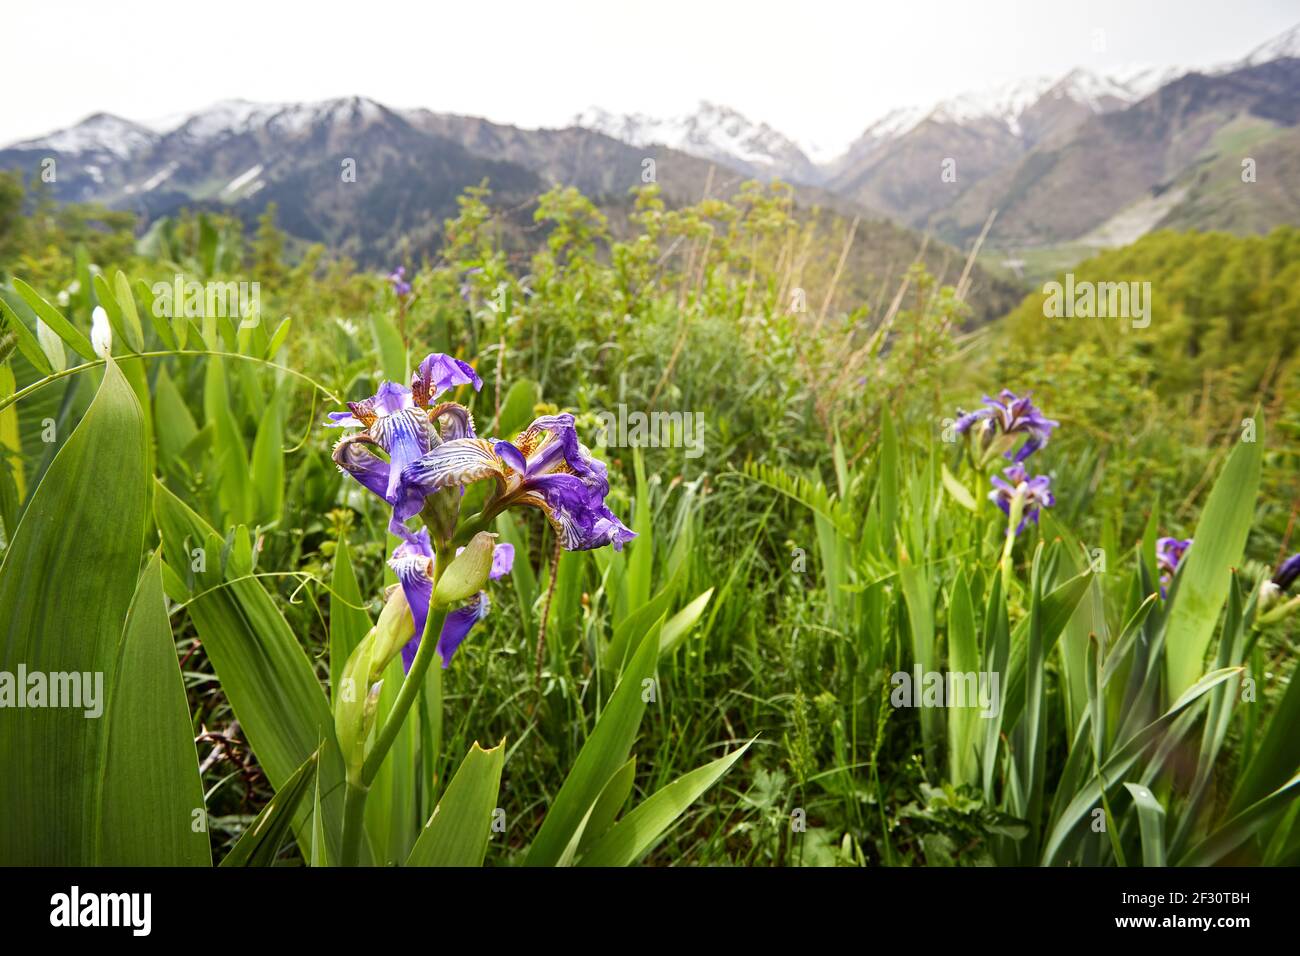 Blossom of violet flowers iris at spring season in the mountains in Almaty, Kazakhstan. Stock Photo